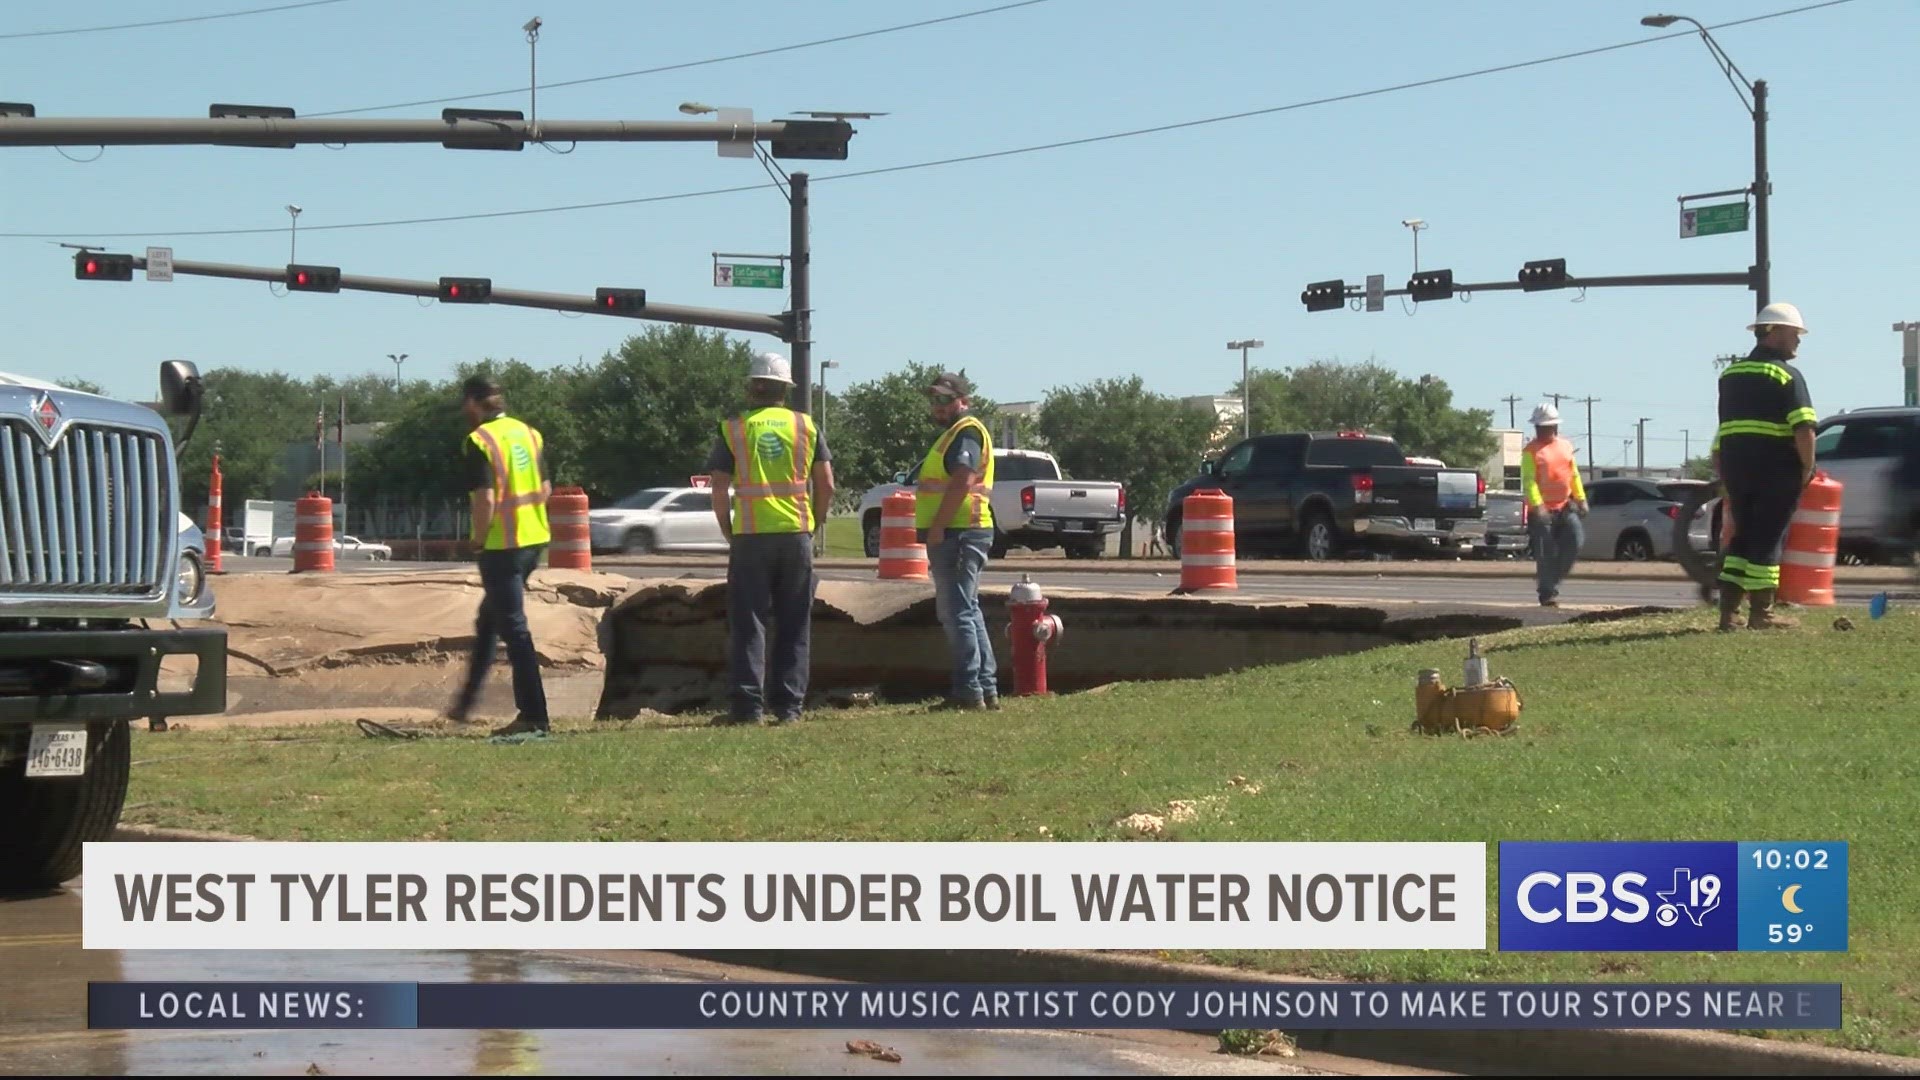 About 10,000 individuals are being impacted by this boil water notice, and the business that it happened right outside of, Sam’s Club, had to shut down it’s deli all